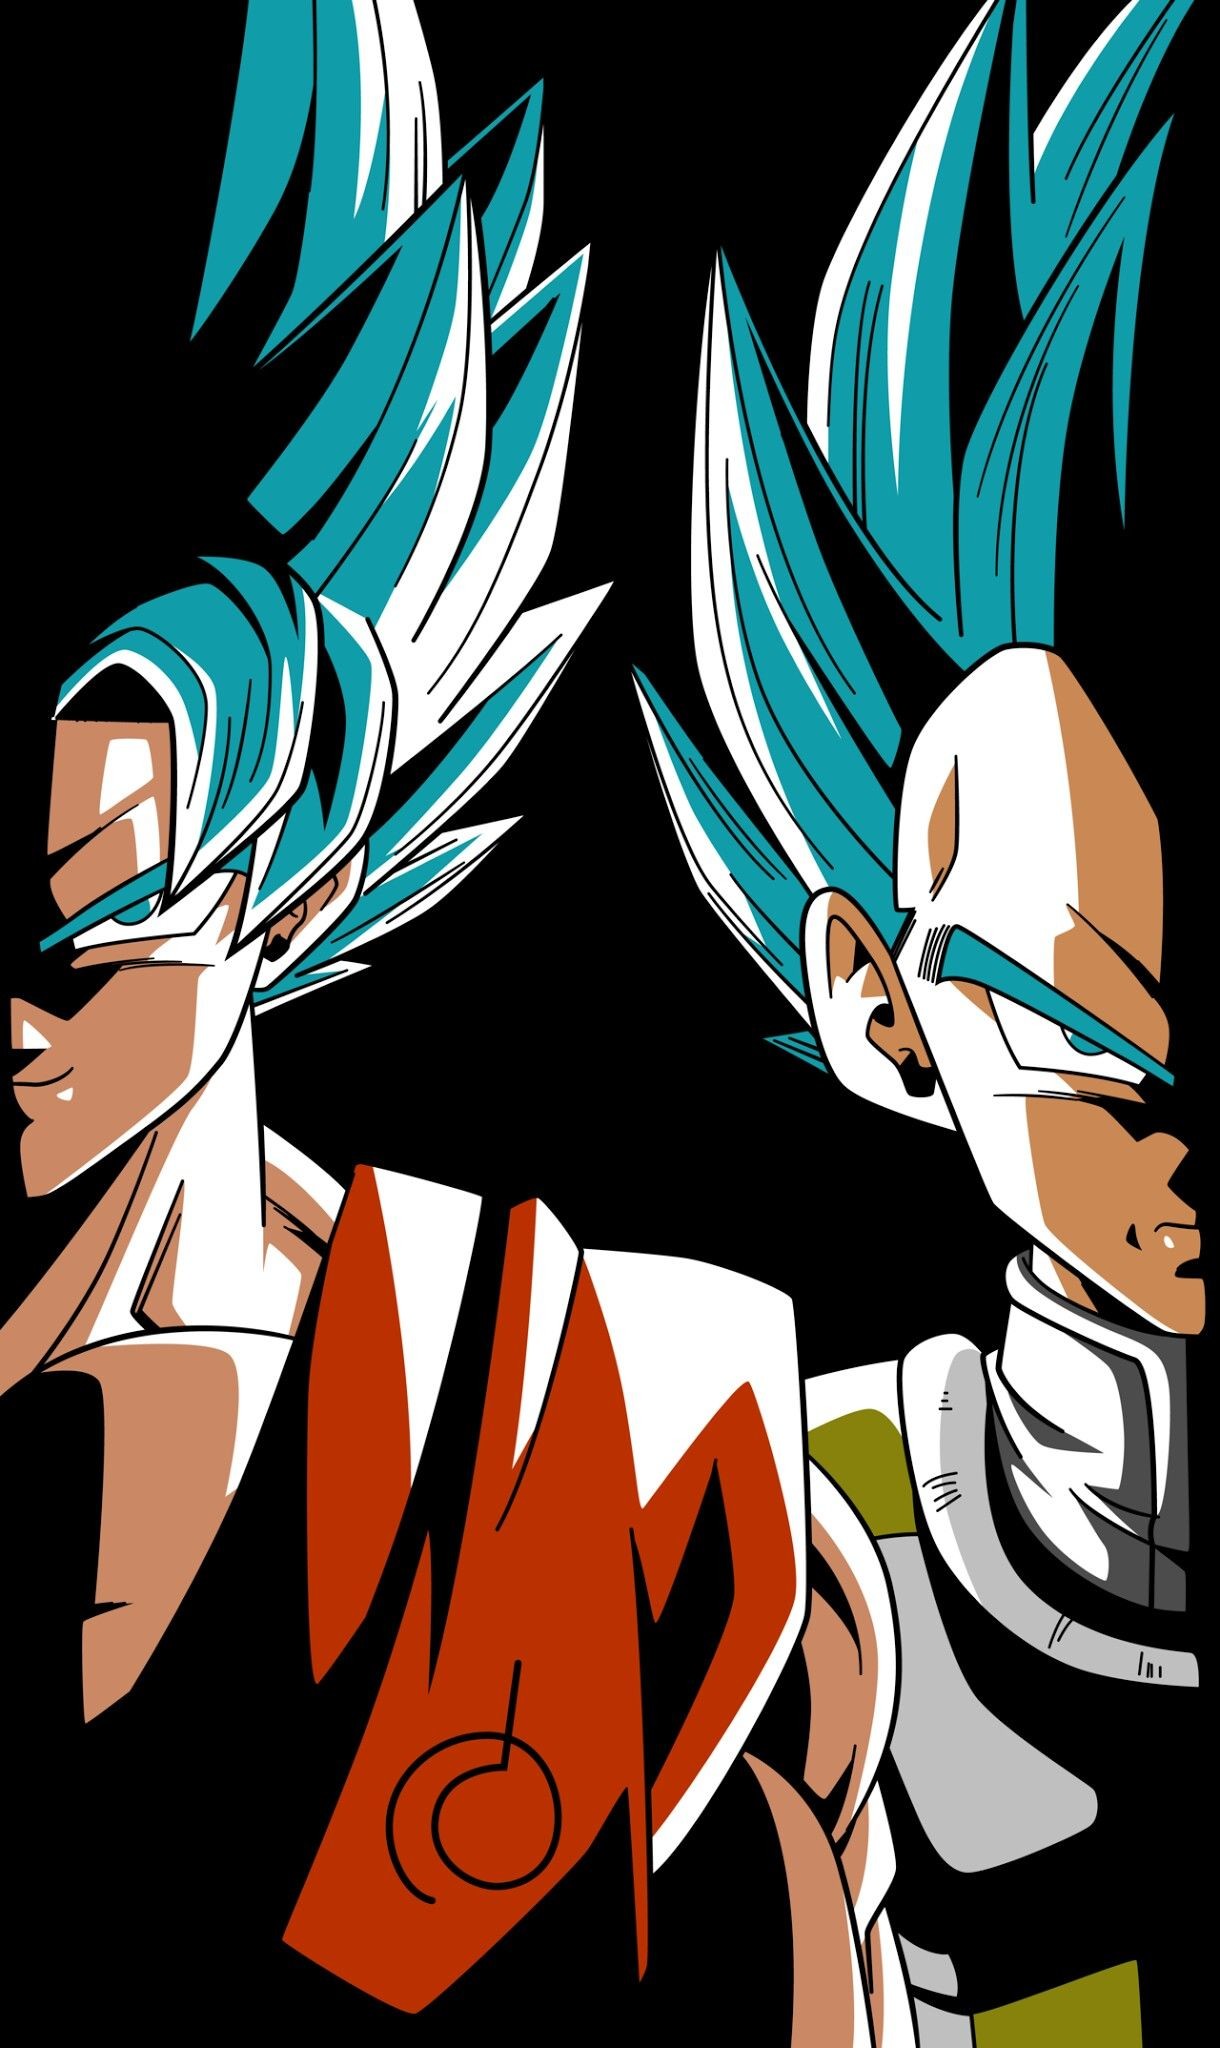 1220x2048, Goku And Vegeta From The Dragon Ball Super - Dragon Ball Super  Phone Wallpaper Hd - 1220x2048 Wallpaper 